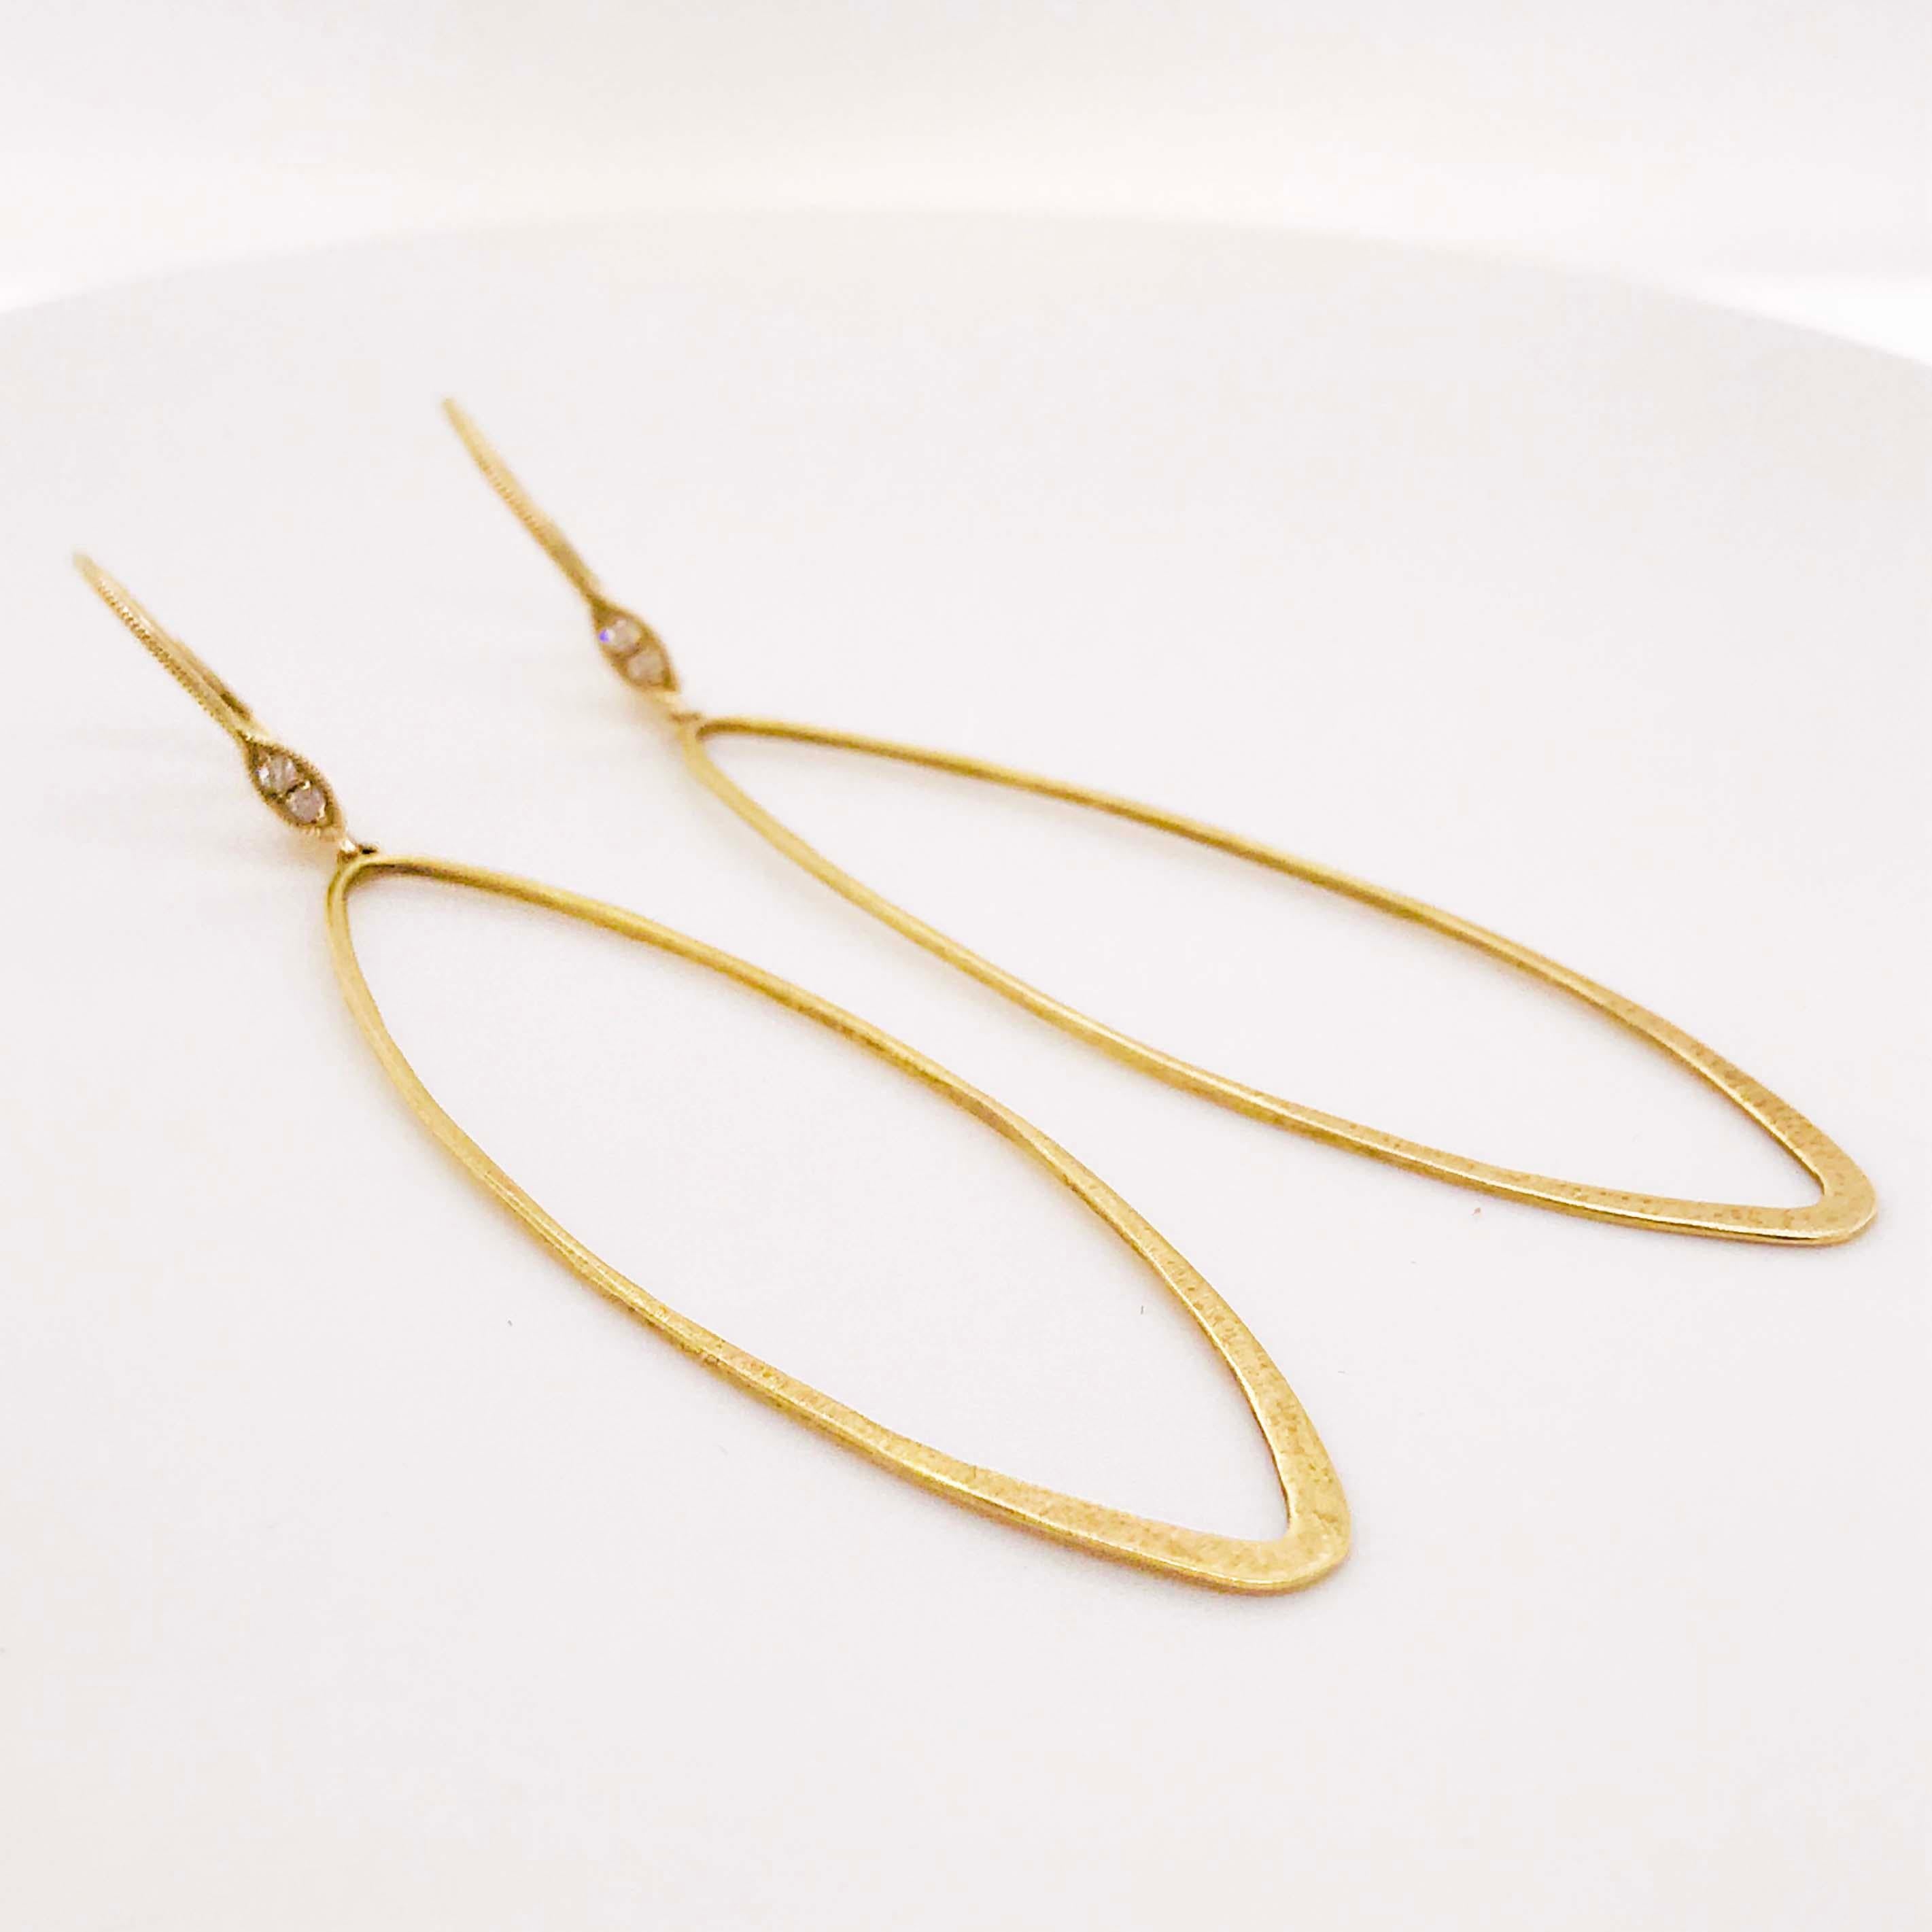 Meira T Designer modern diamond fashion drop earrings in 14 karat yellow gold! The designer diamond earring drops have an open oval design that is elongating and accentuating! With a retro shape and modern finish, these are unique and fun! With the